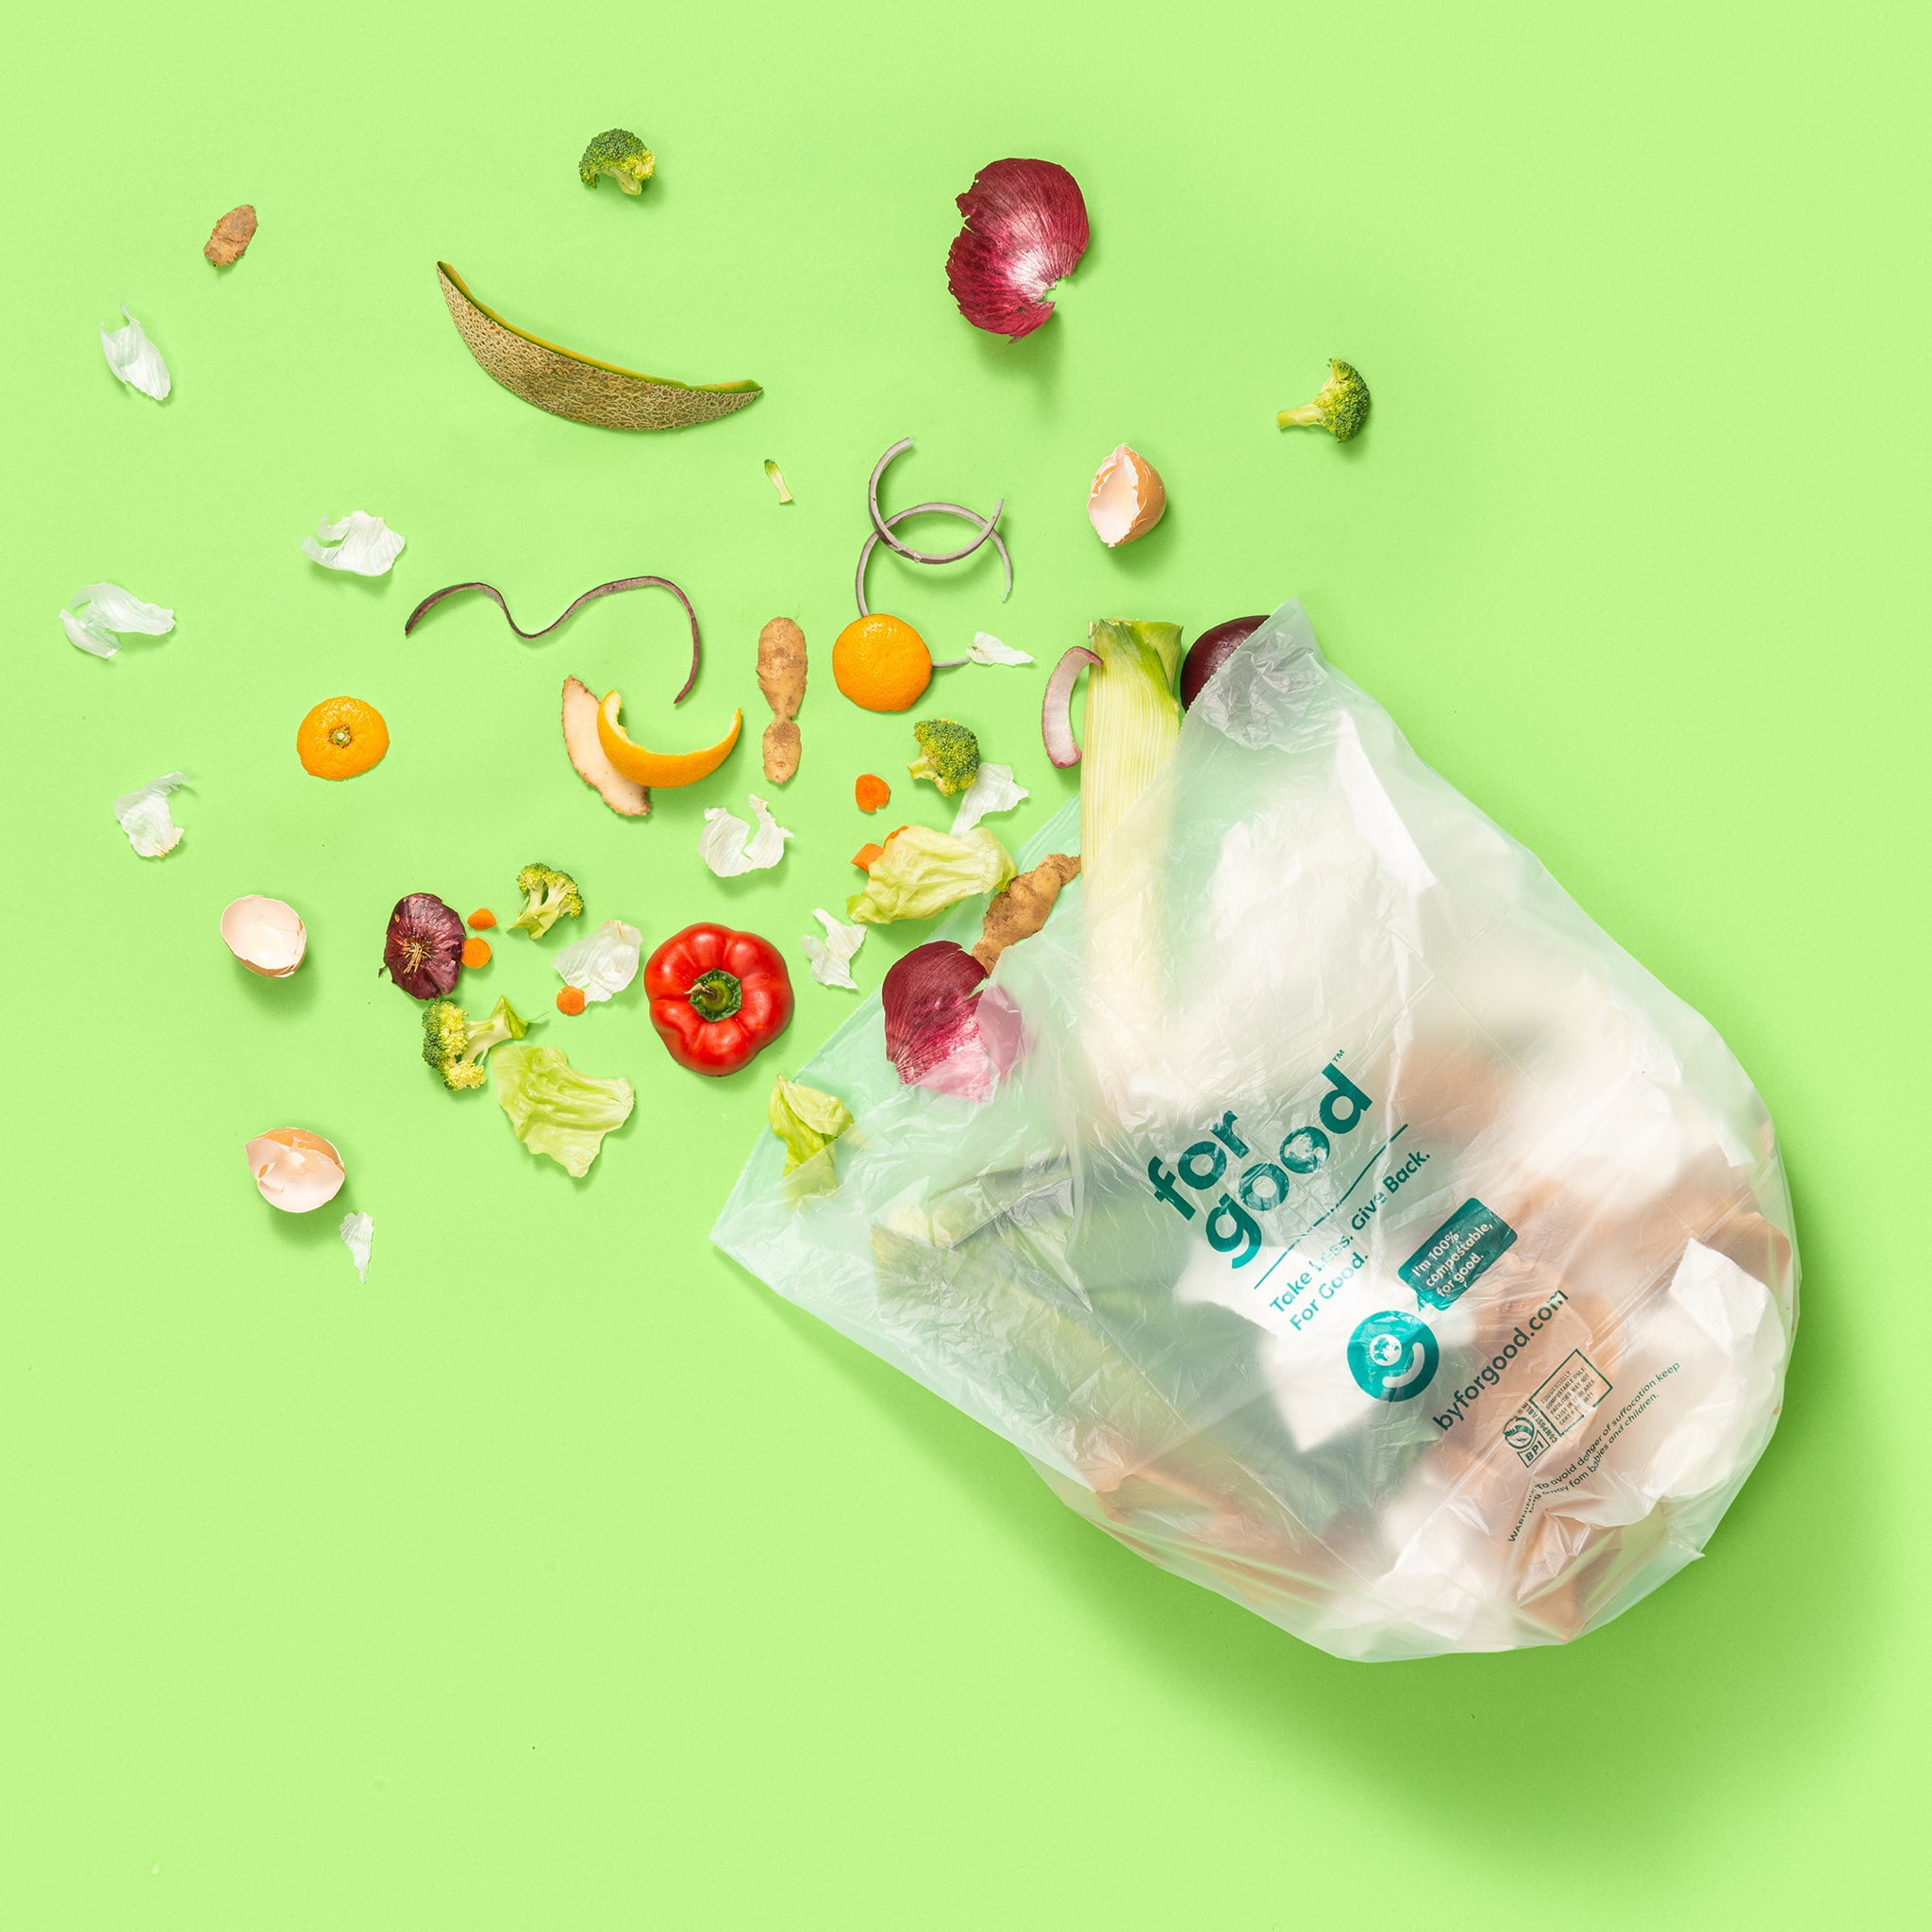 32-Gallon Eco-Friendly Trash Bags — Order Evolution Bags From Sustainable  Goods Today – Sustainable Goods Corp